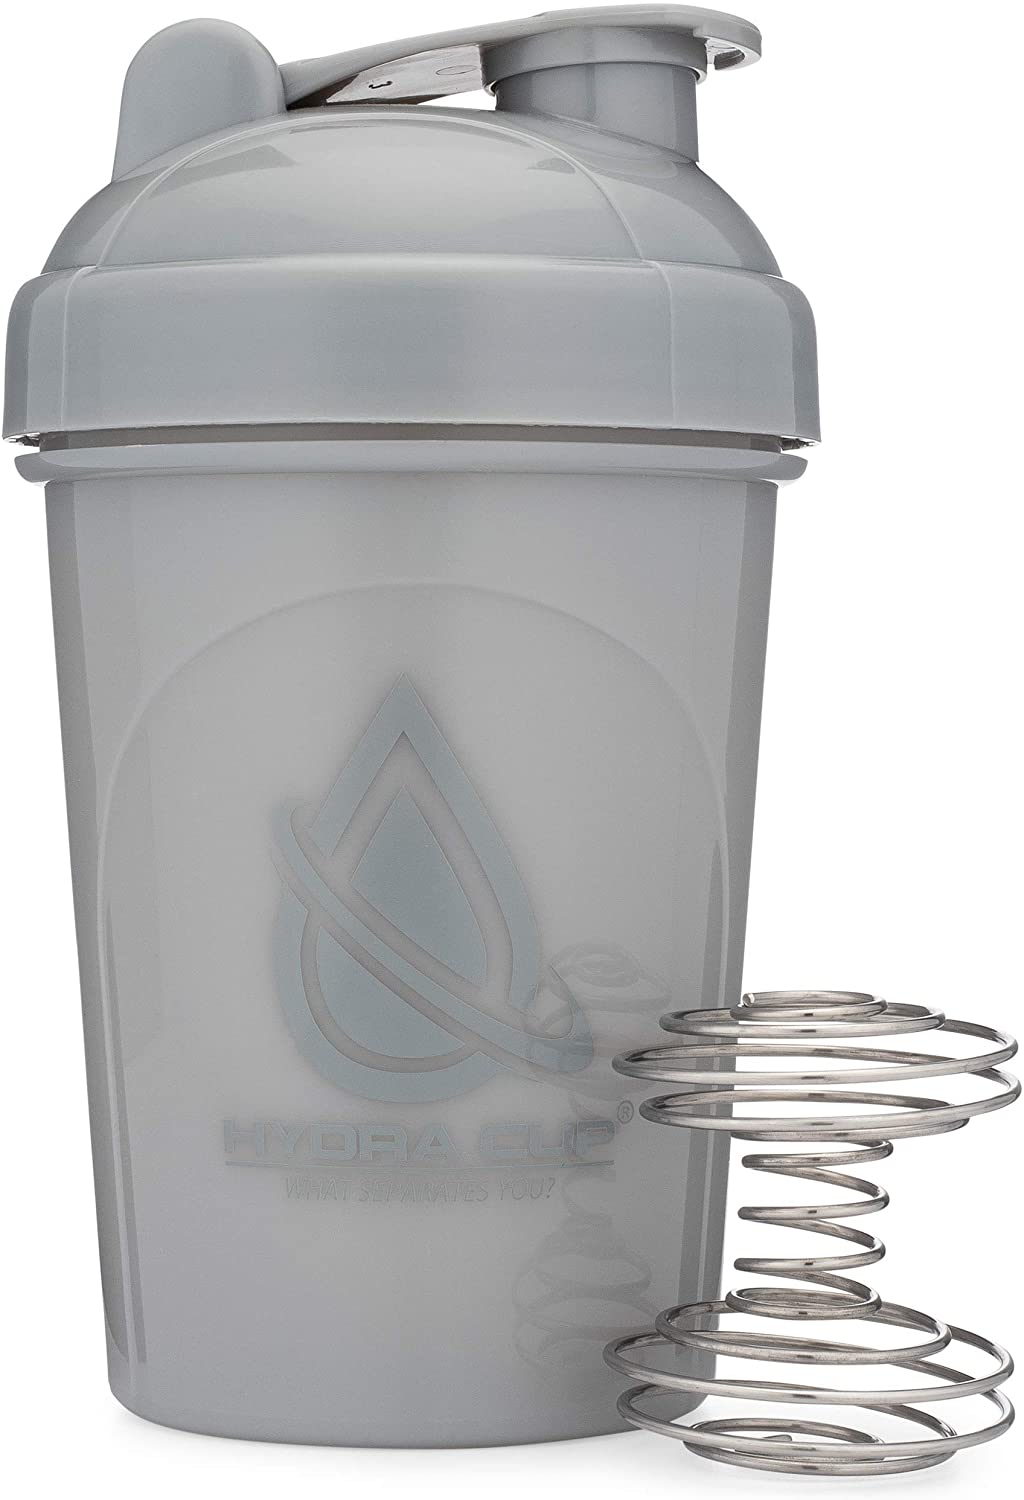 Hydra Cup - Kratom Accessories Womens Shaker Bottle With Wire